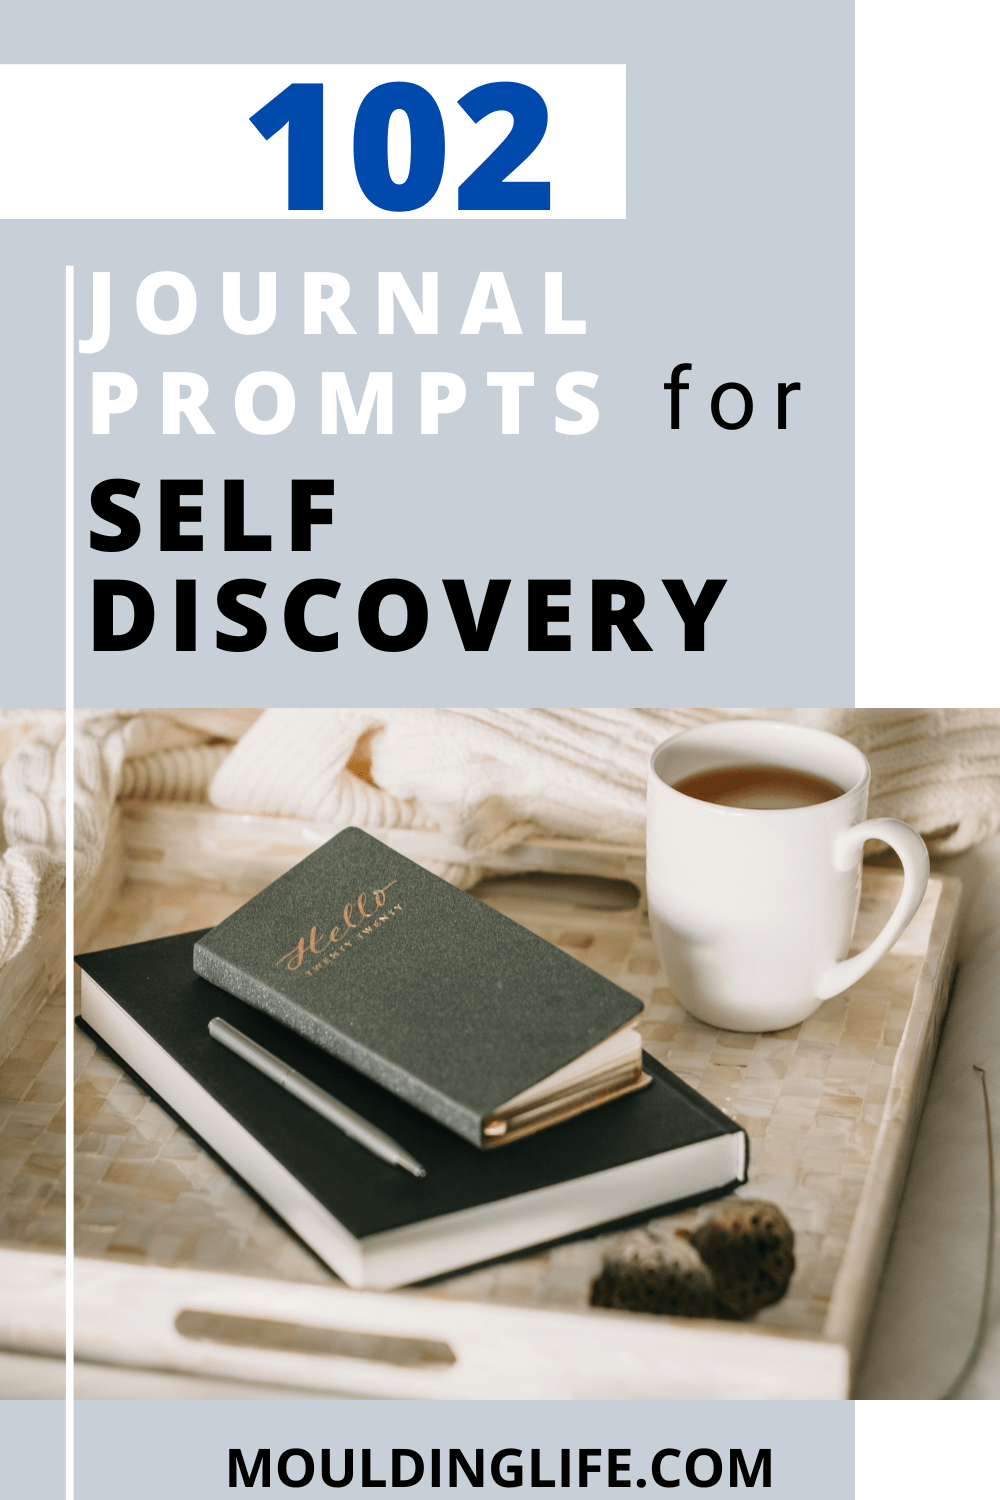 102 Inspiring Journal Prompts for Self Discovery - Moulding Life